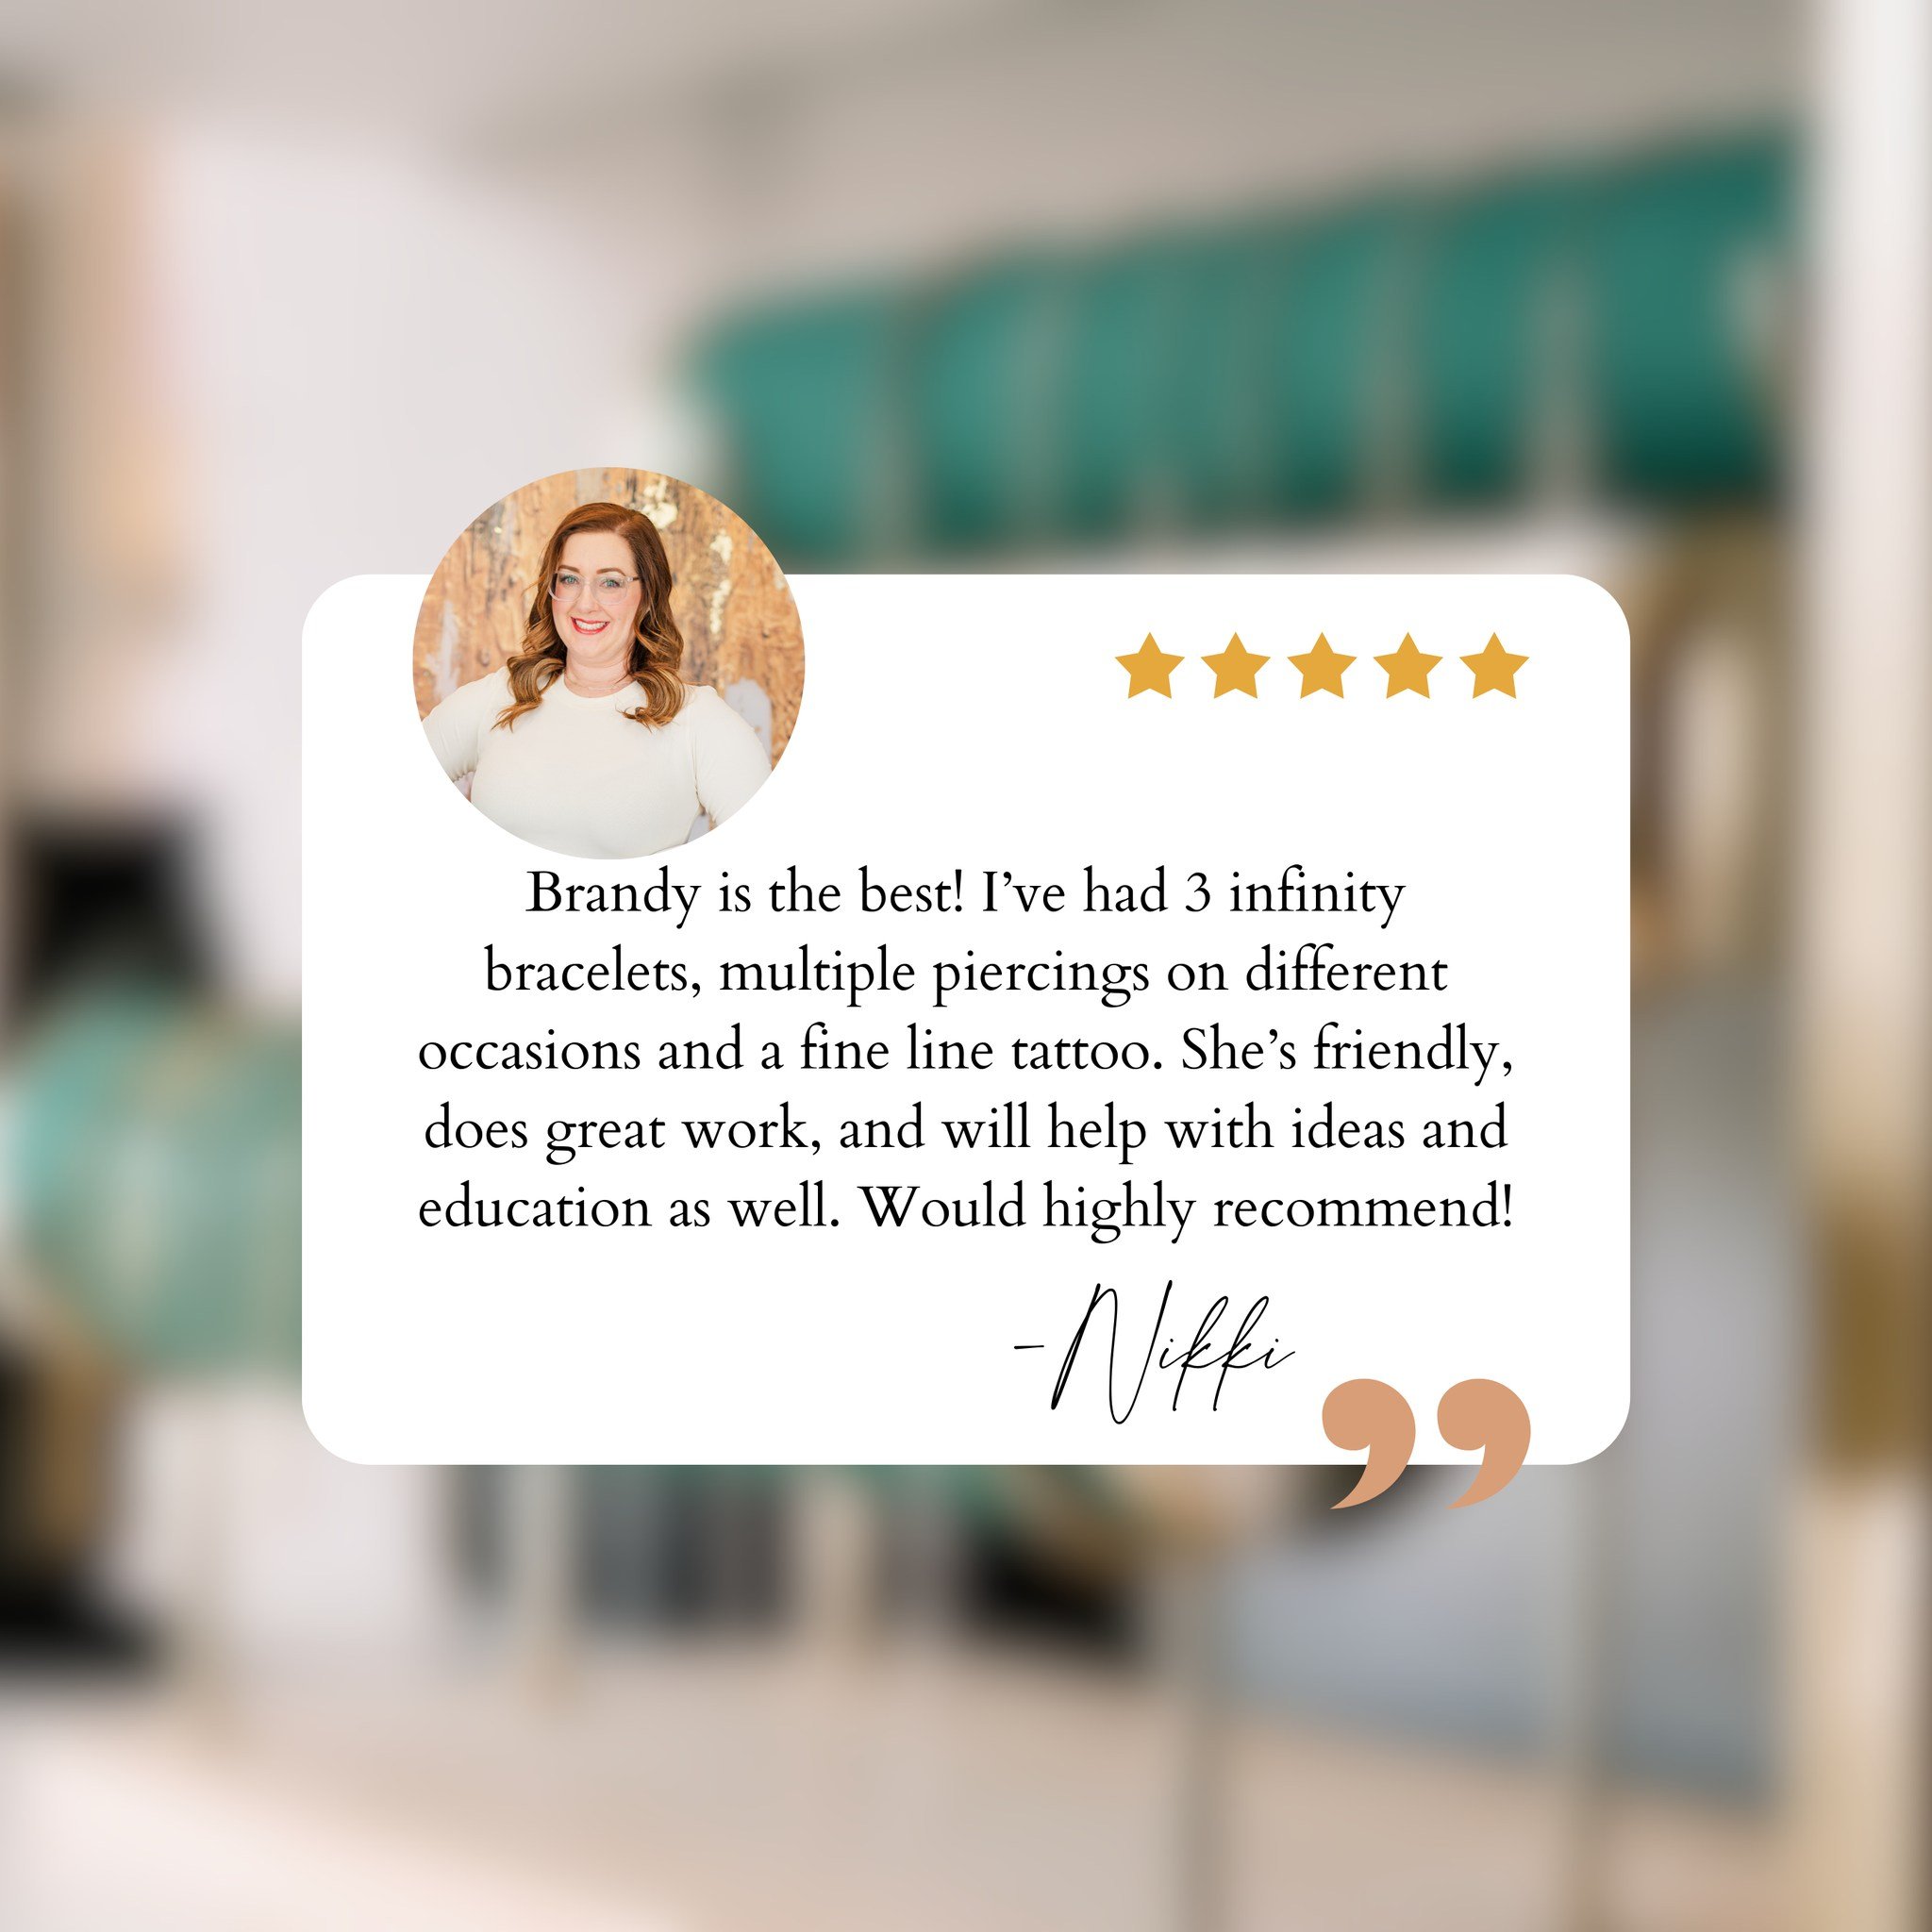 We are so grateful when you take the time to leave us a great review! We love serving you! 
⭐⭐⭐⭐⭐
Book your appointment now at www.meadowandcharm.com